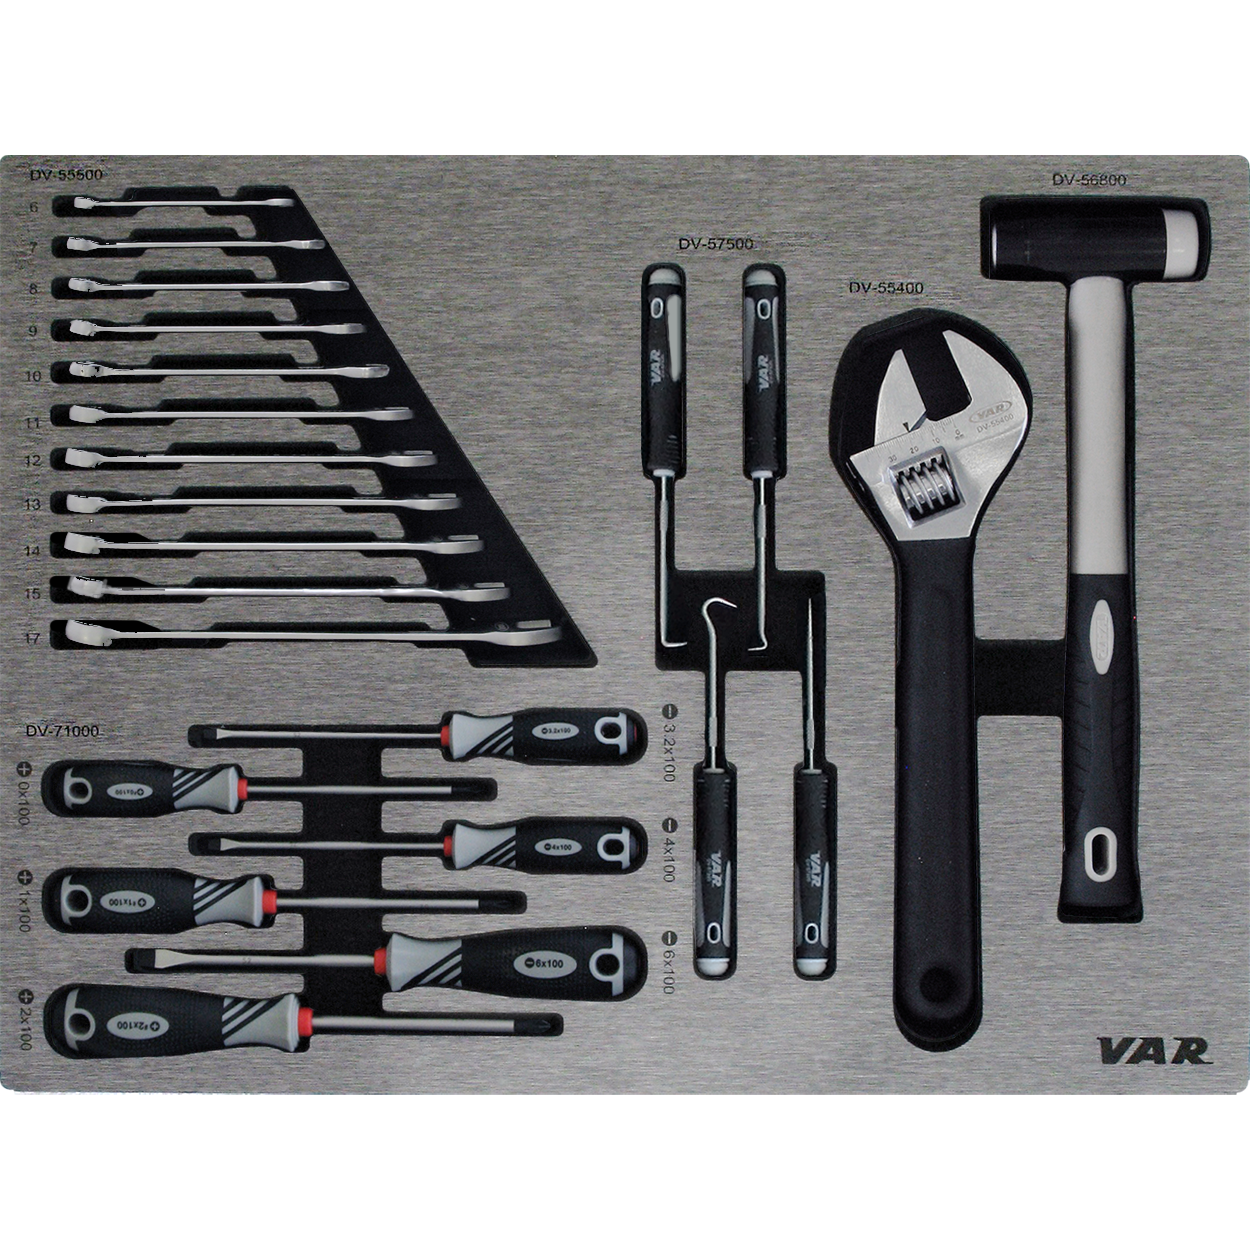 Tool tray for spanners, screwdrivers, hooks, hammer - TOOLS INCLUDED